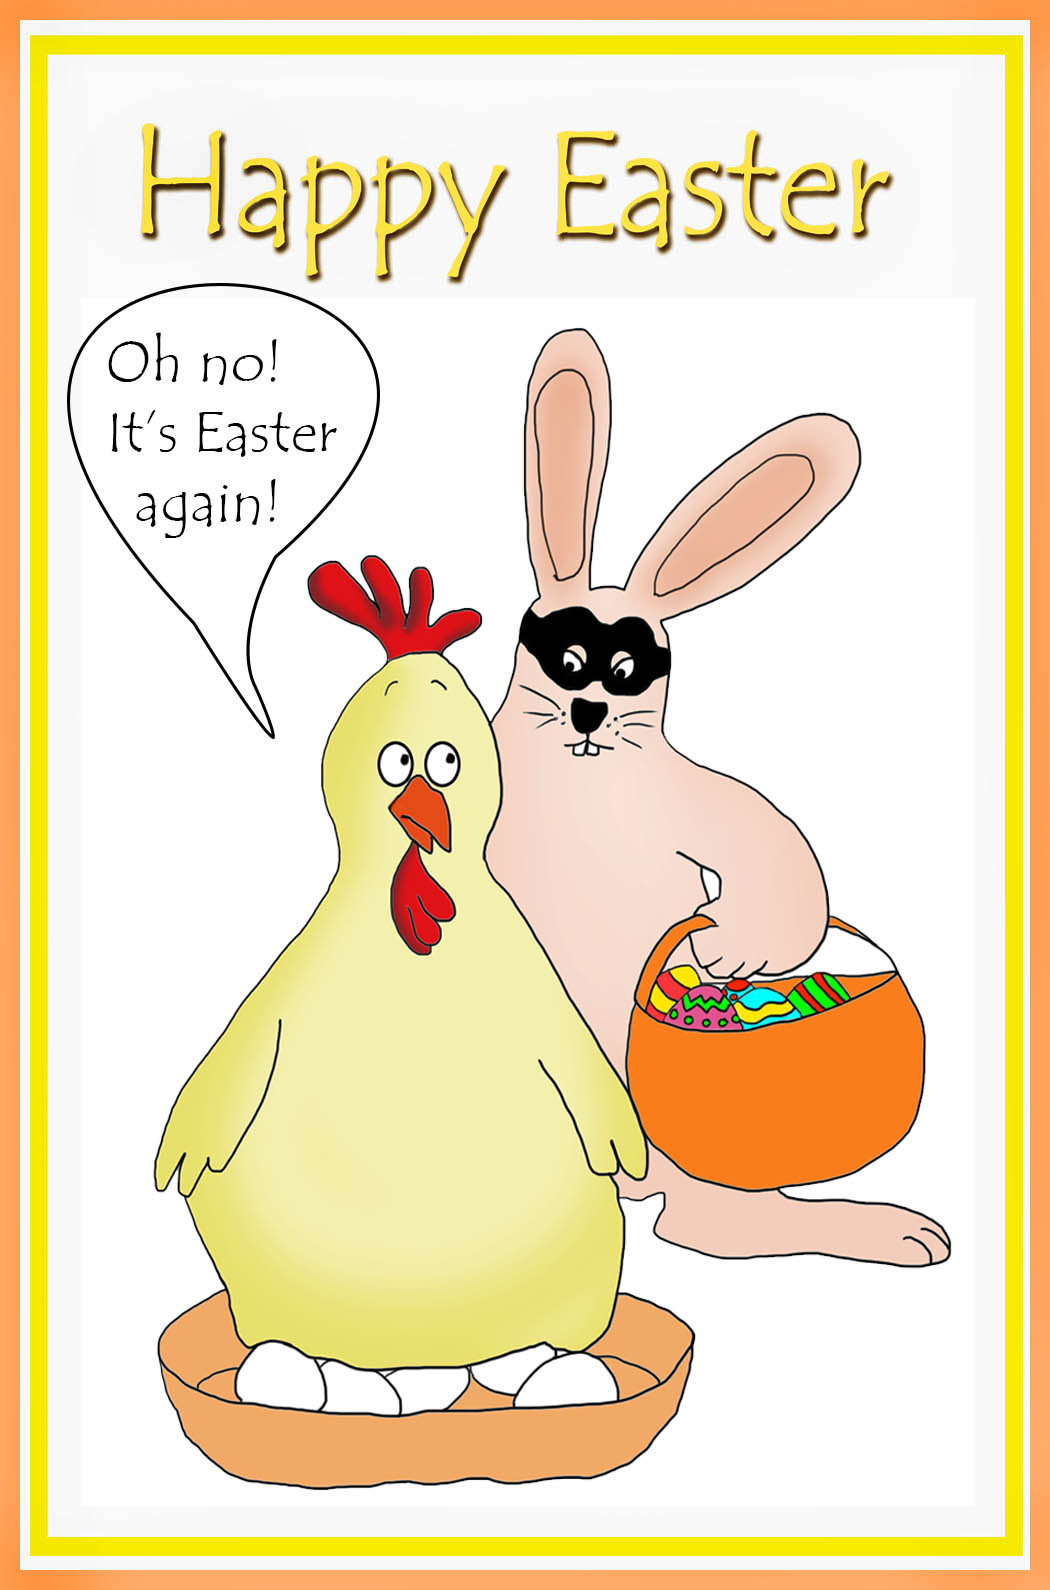 Easter Quotes Funny
 17 Free Funny Easter Greeting Cards